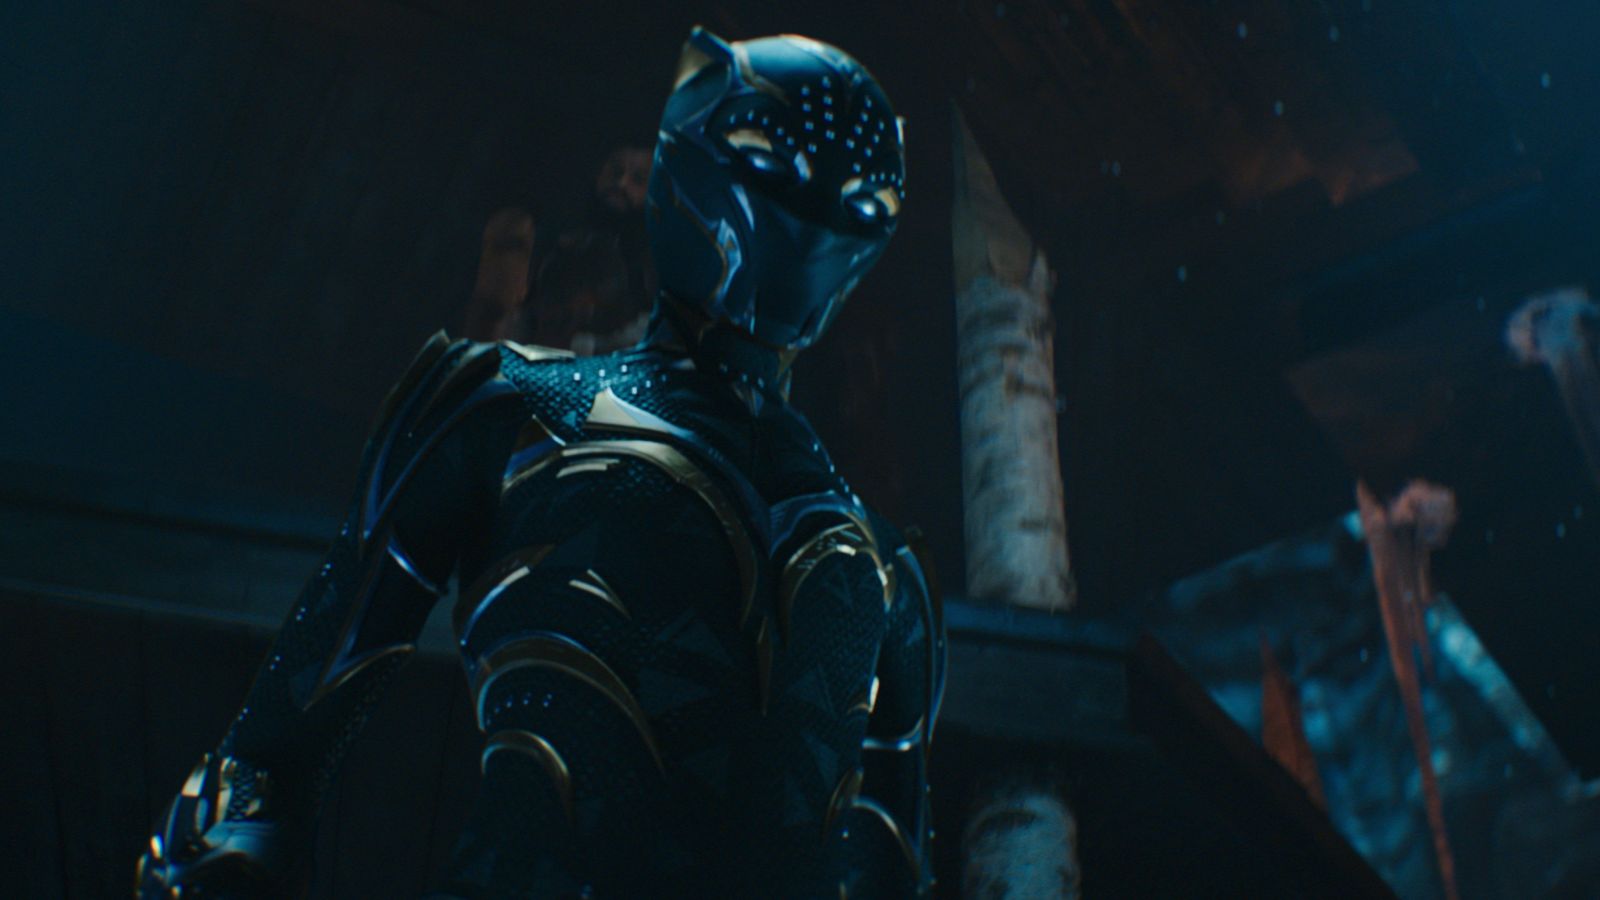 Black Panther returns - but the cast say it felt 'hollow' without Chadwick Boseman